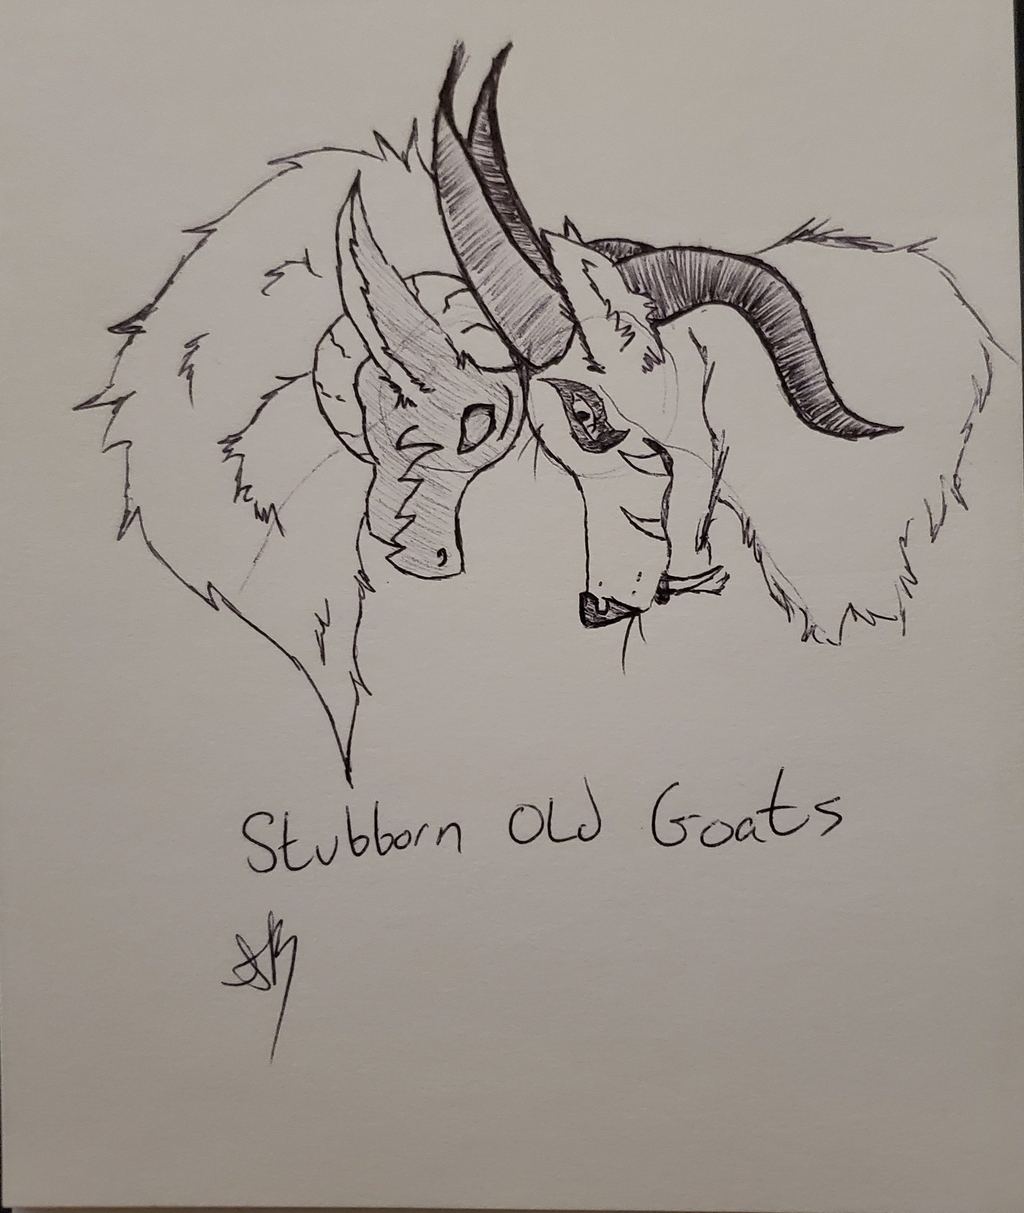 Most recent image: Stubborn old goats